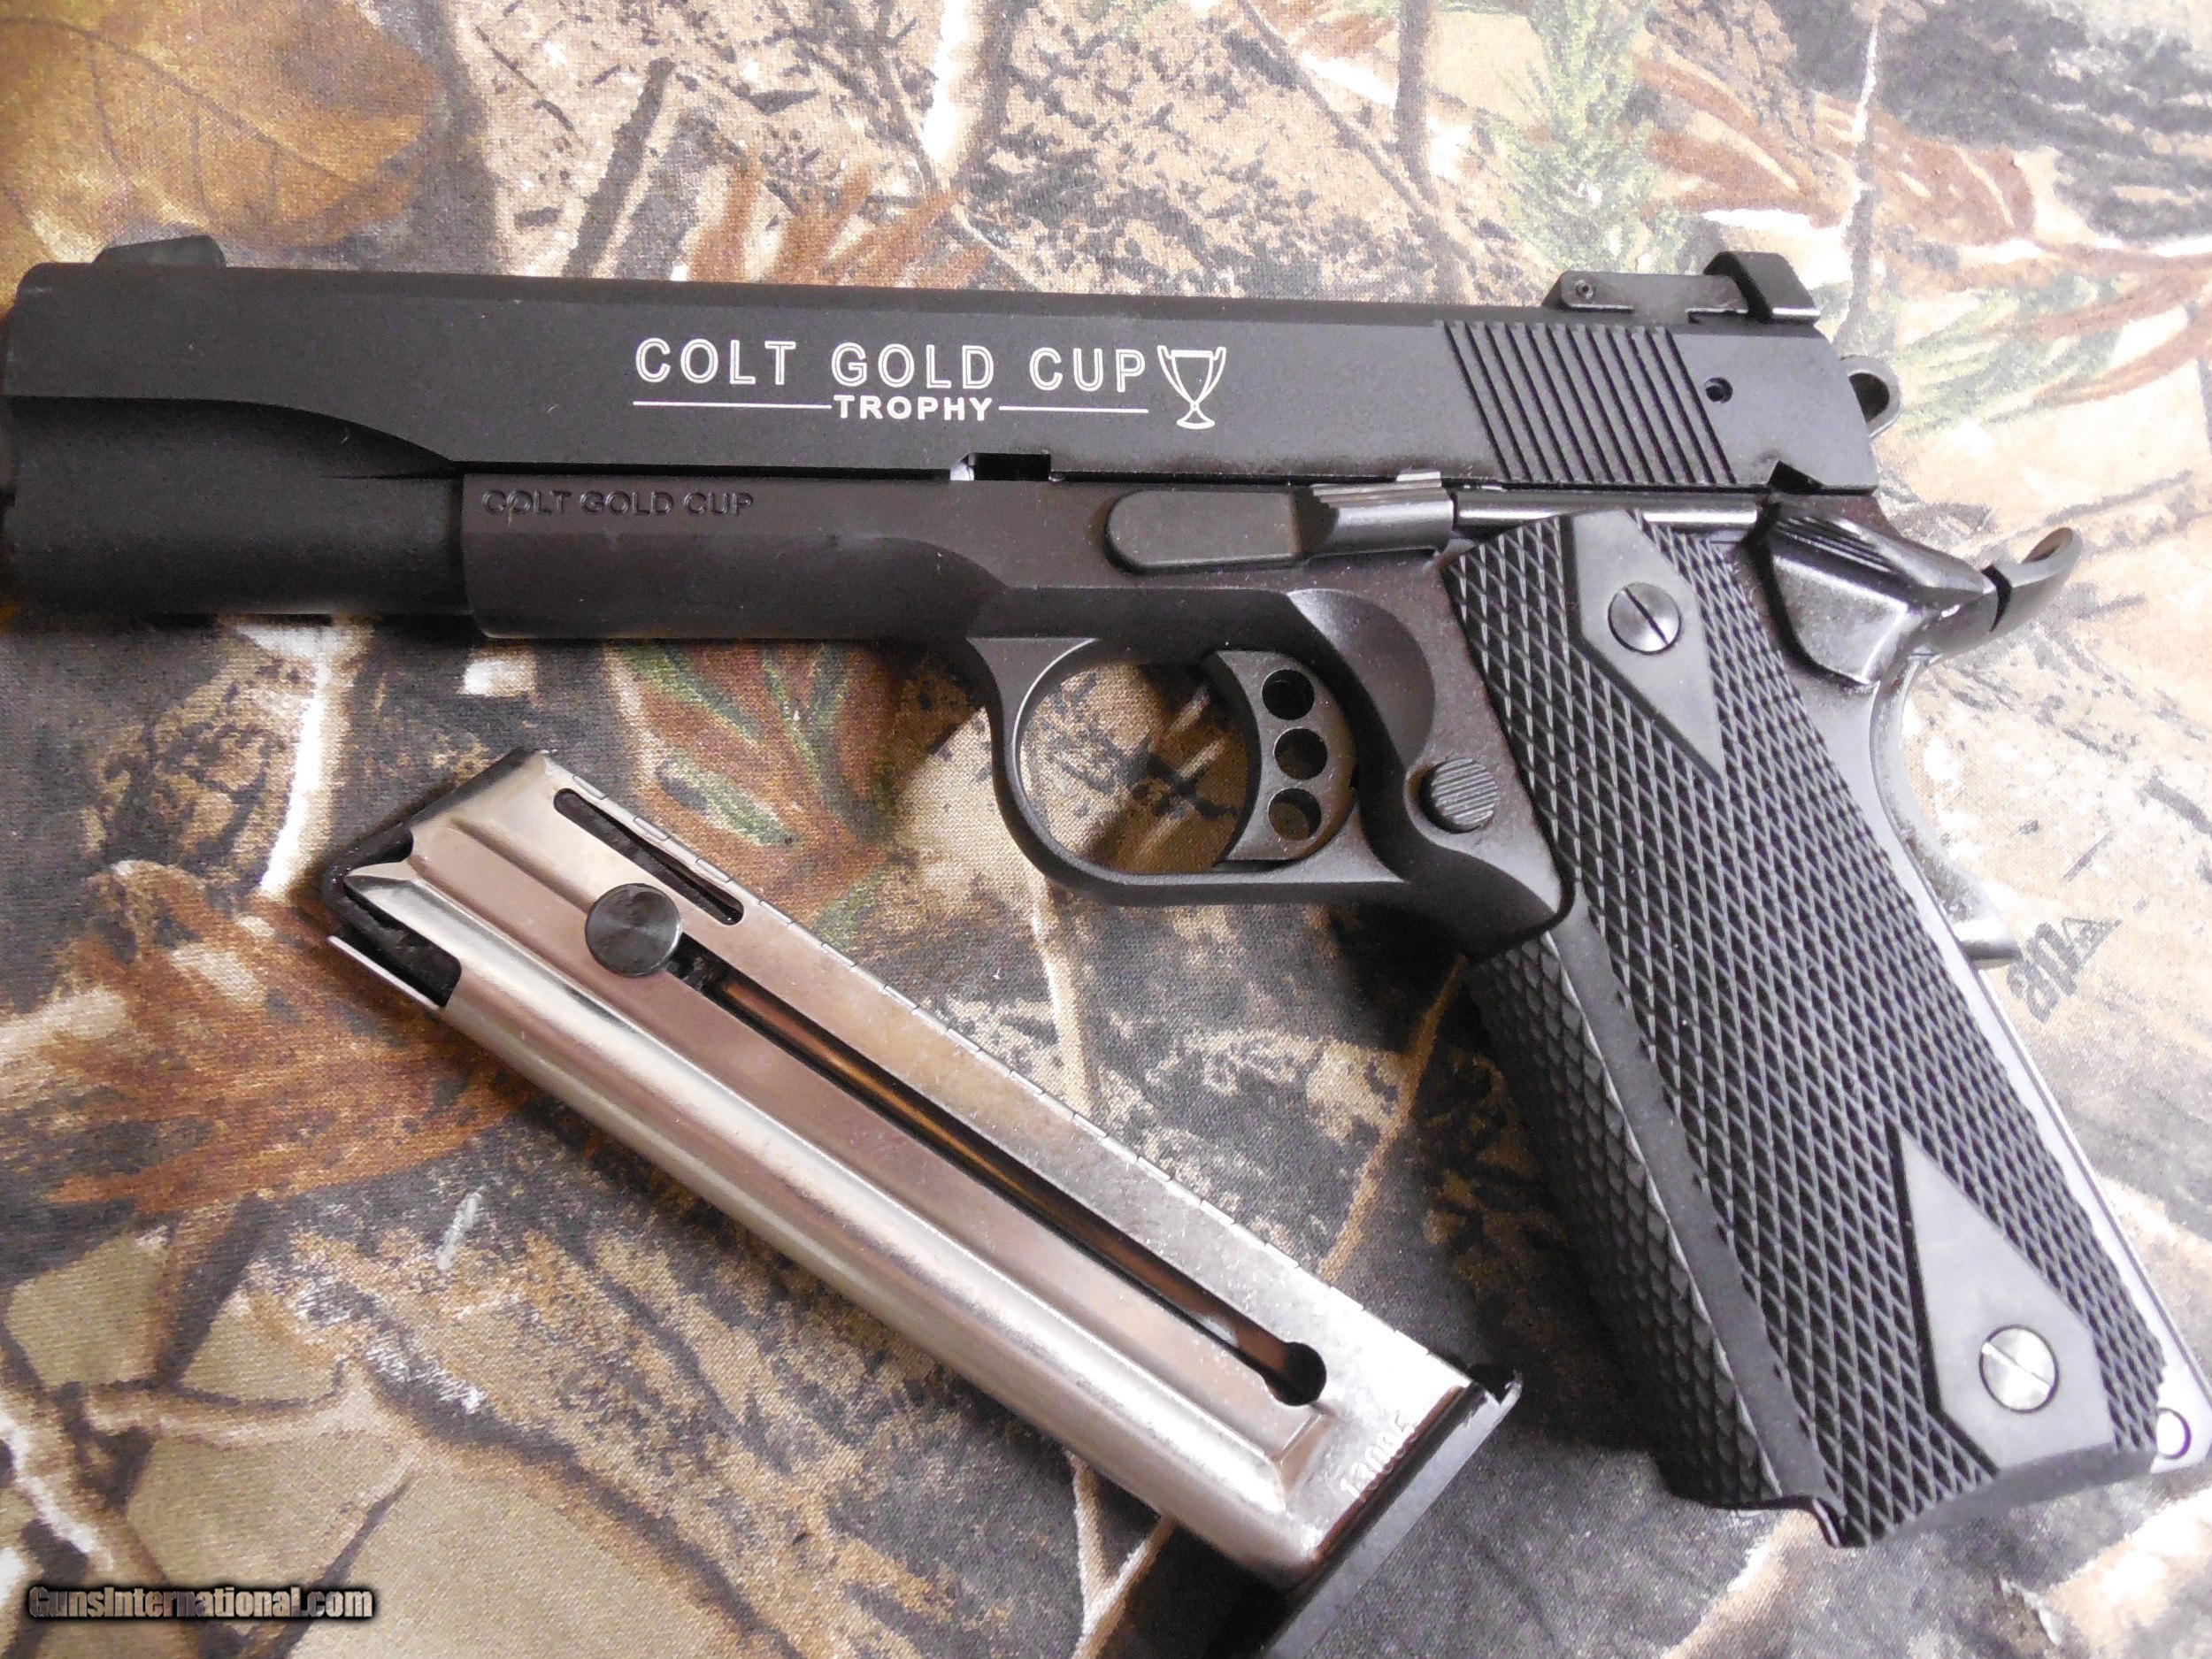 COLT GOLD CUP, 22 L.R., 12 ROUND MAGAZINE, ADJUSTABALE SIGHTS, Black rubber wrap-around grips, Fully adjustable sight,FACTORY